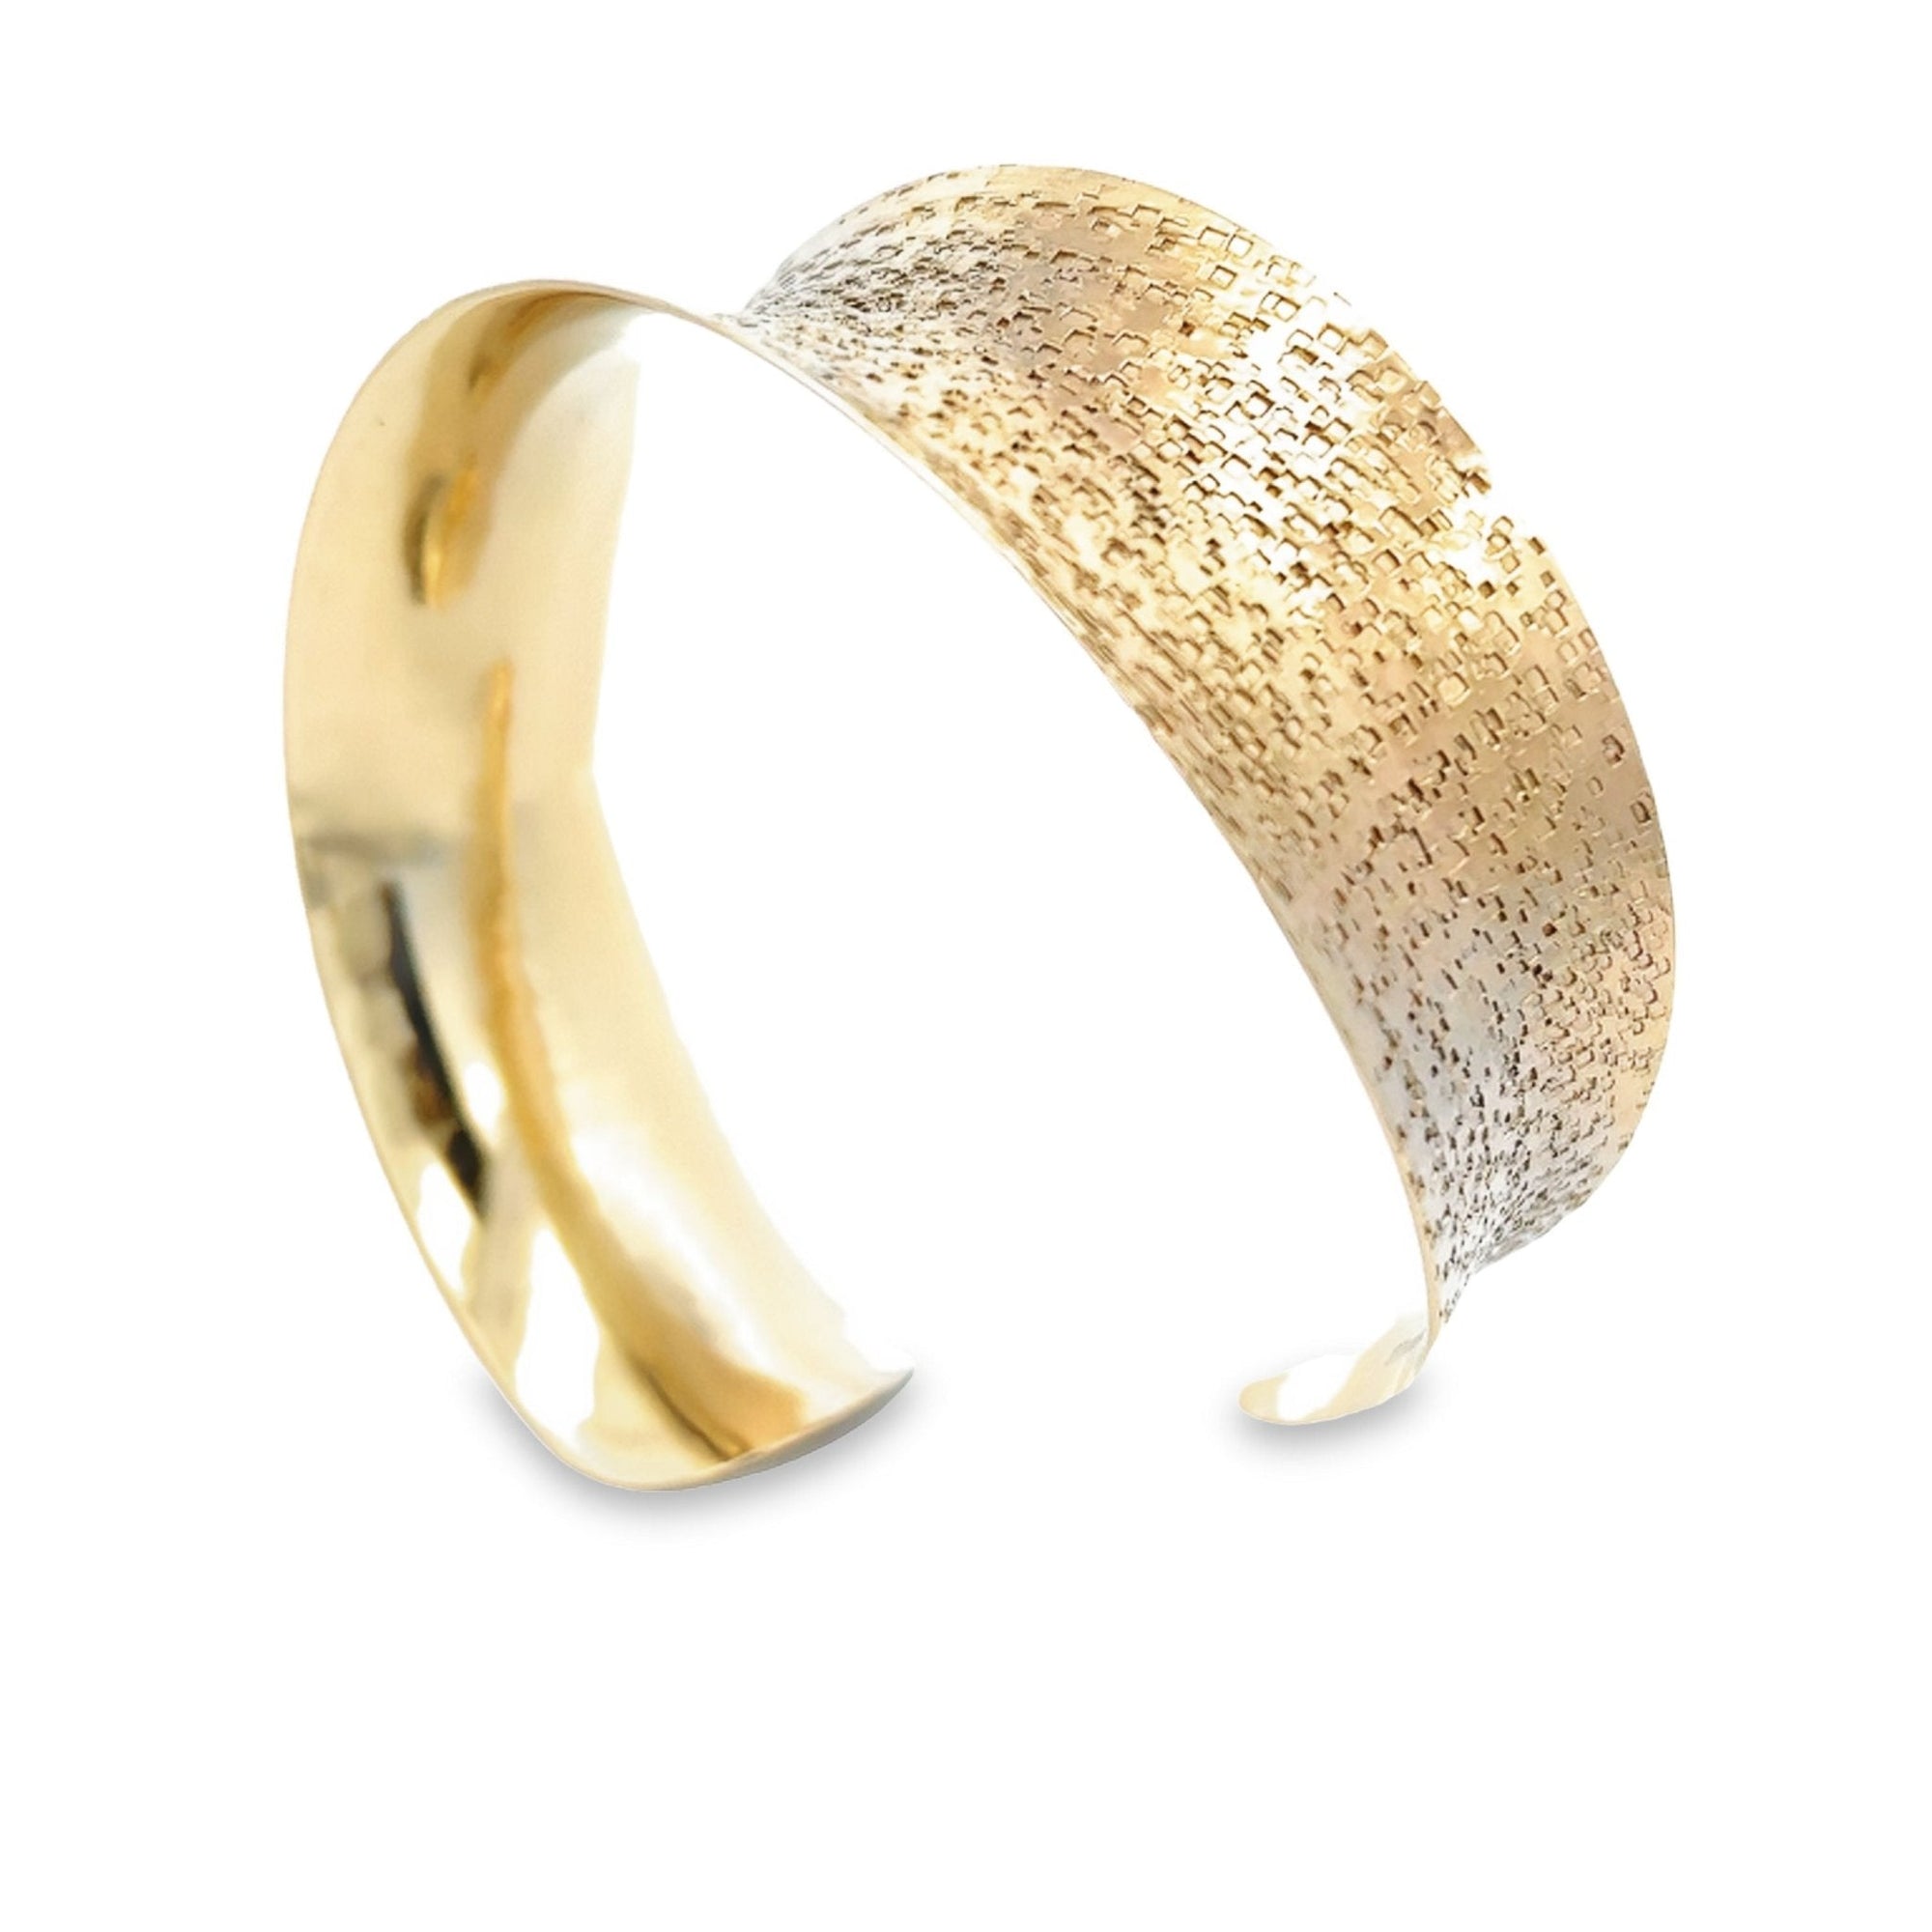 14K Gold Texturized Anticlastic Bangle Bracelet Right View